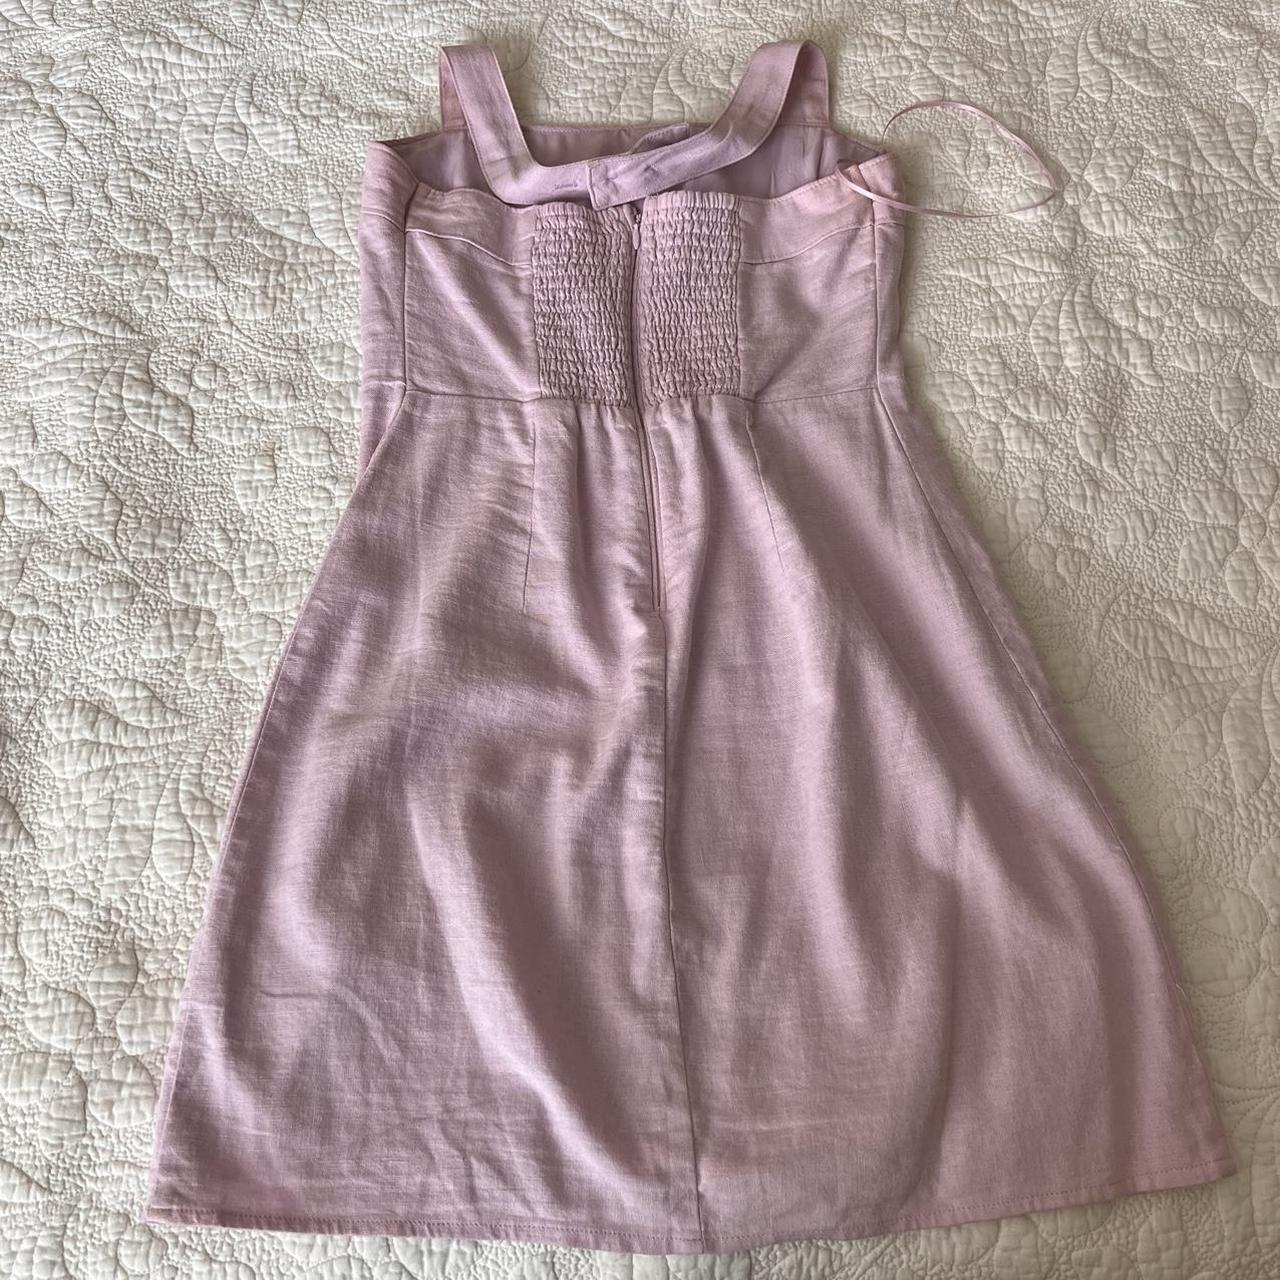 Abercrombie & Fitch Women's Pink and Purple Dress | Depop